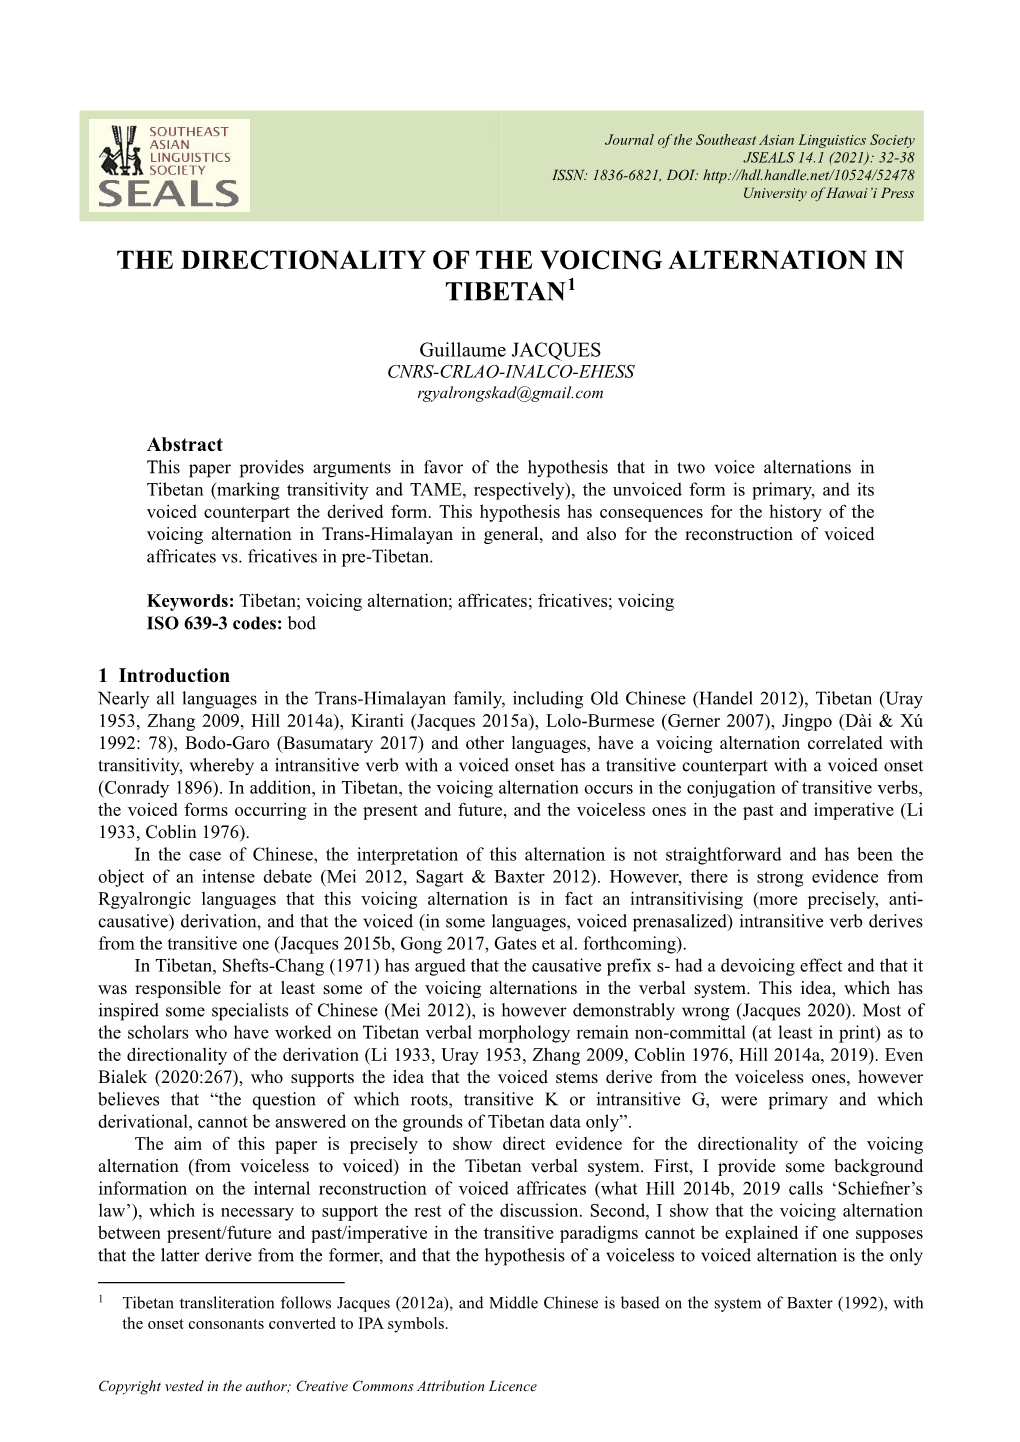 The Directionality of the Voicing Alternation in Tibetan1